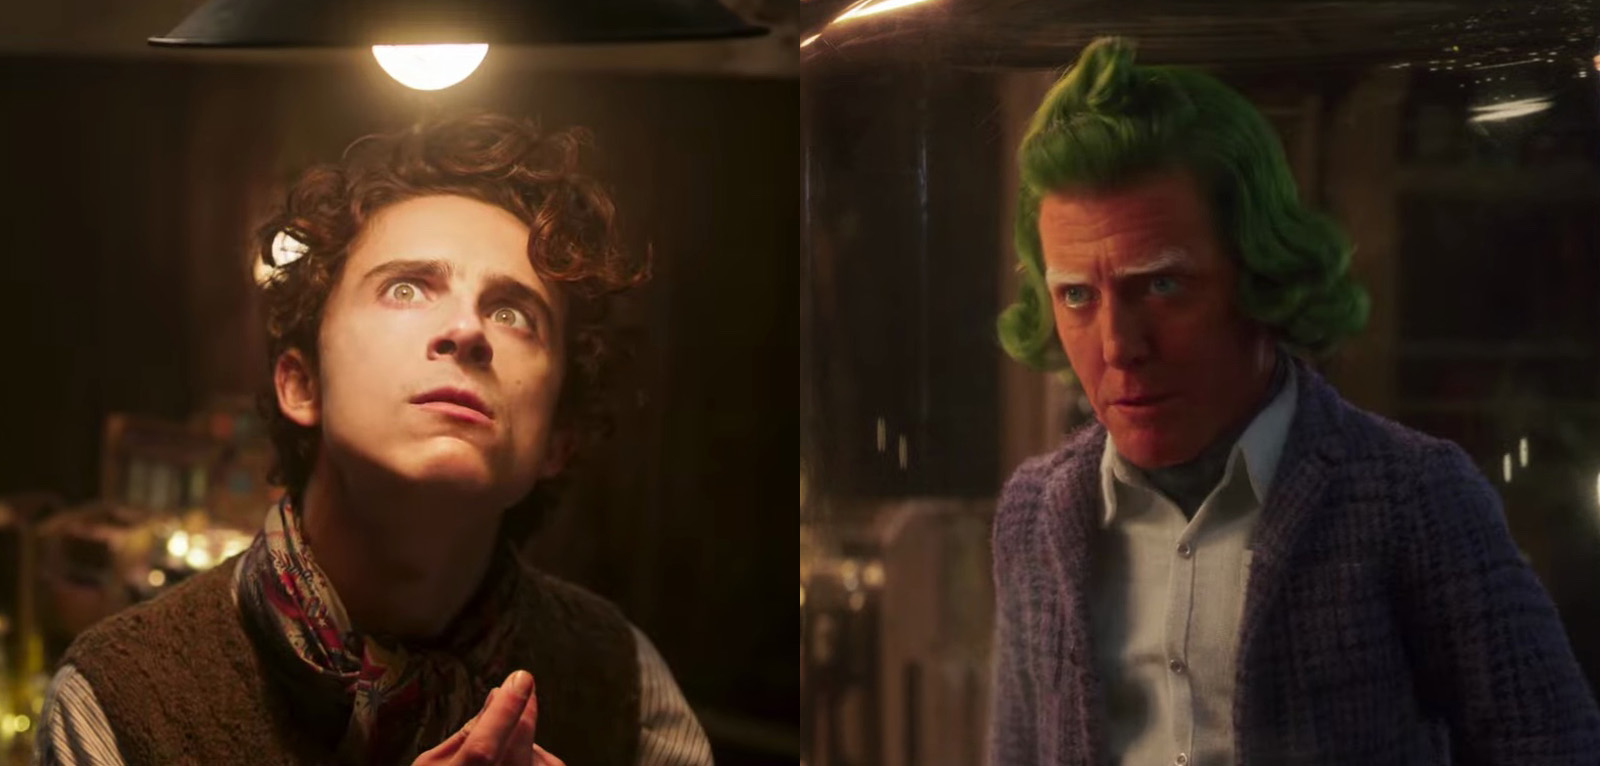 A spliced shot of Timothee Chalamet’s Wonka and Hugh grant has a green-haired red-faced Oompa Loompa